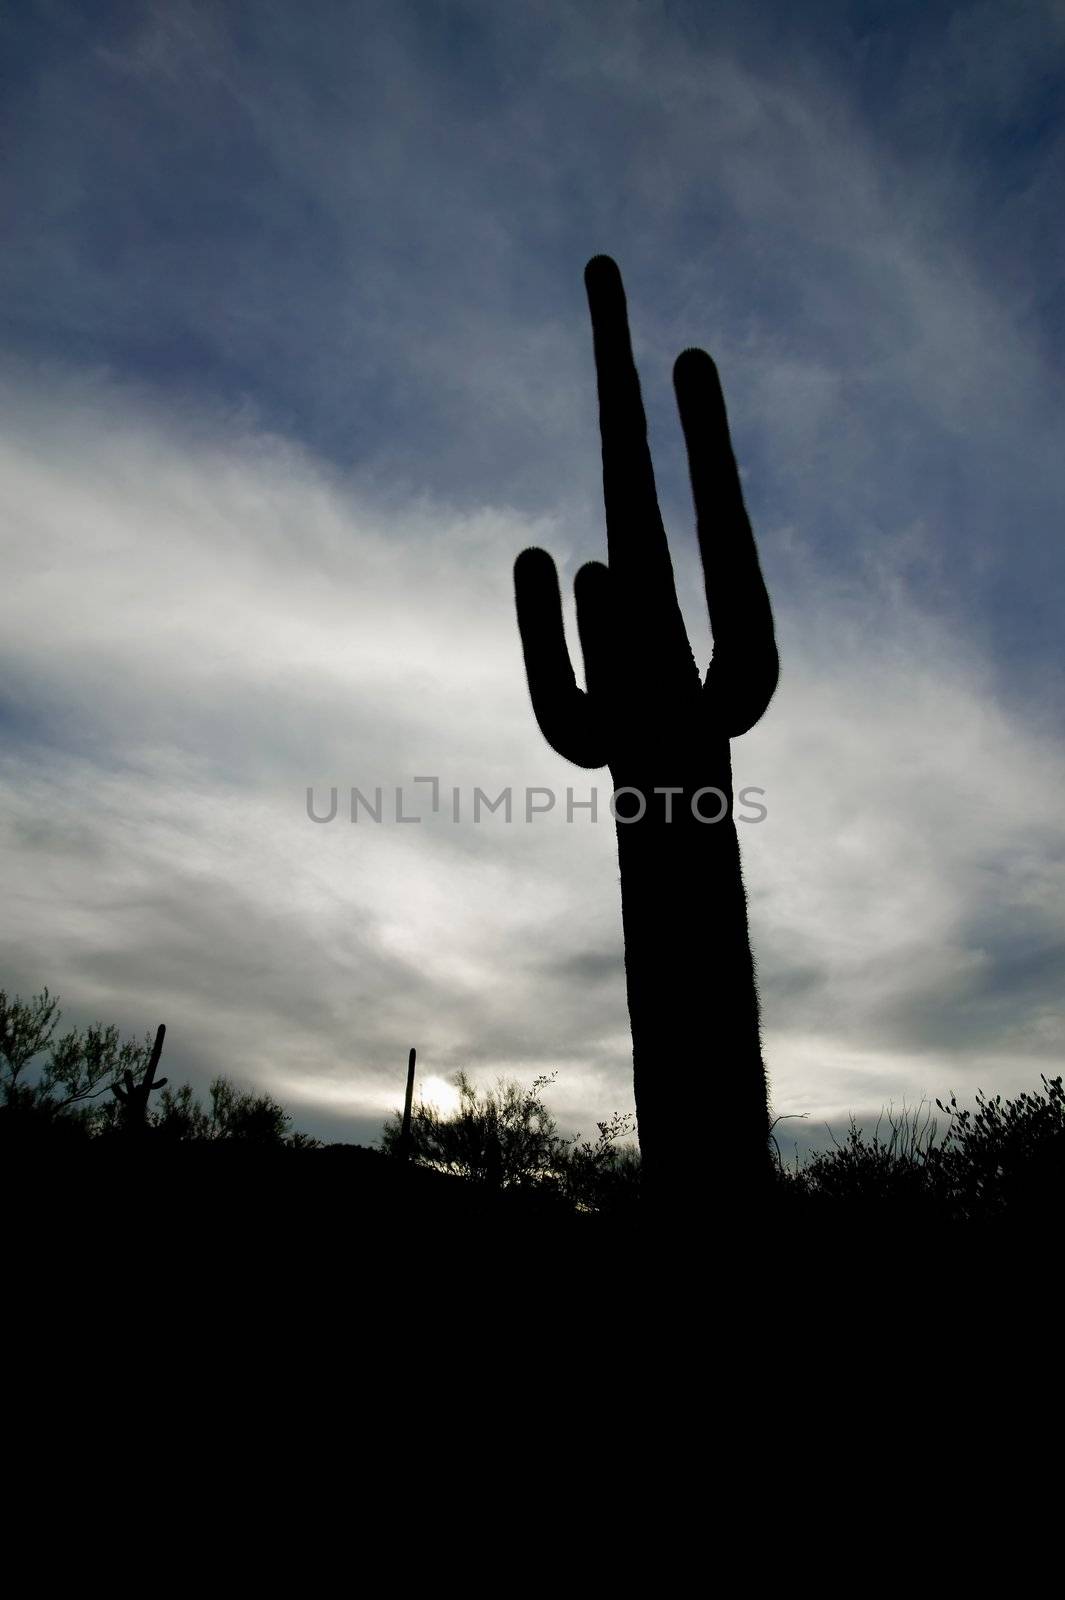 Saguaro cactus silhouetted against a cloudy sky at sunset.